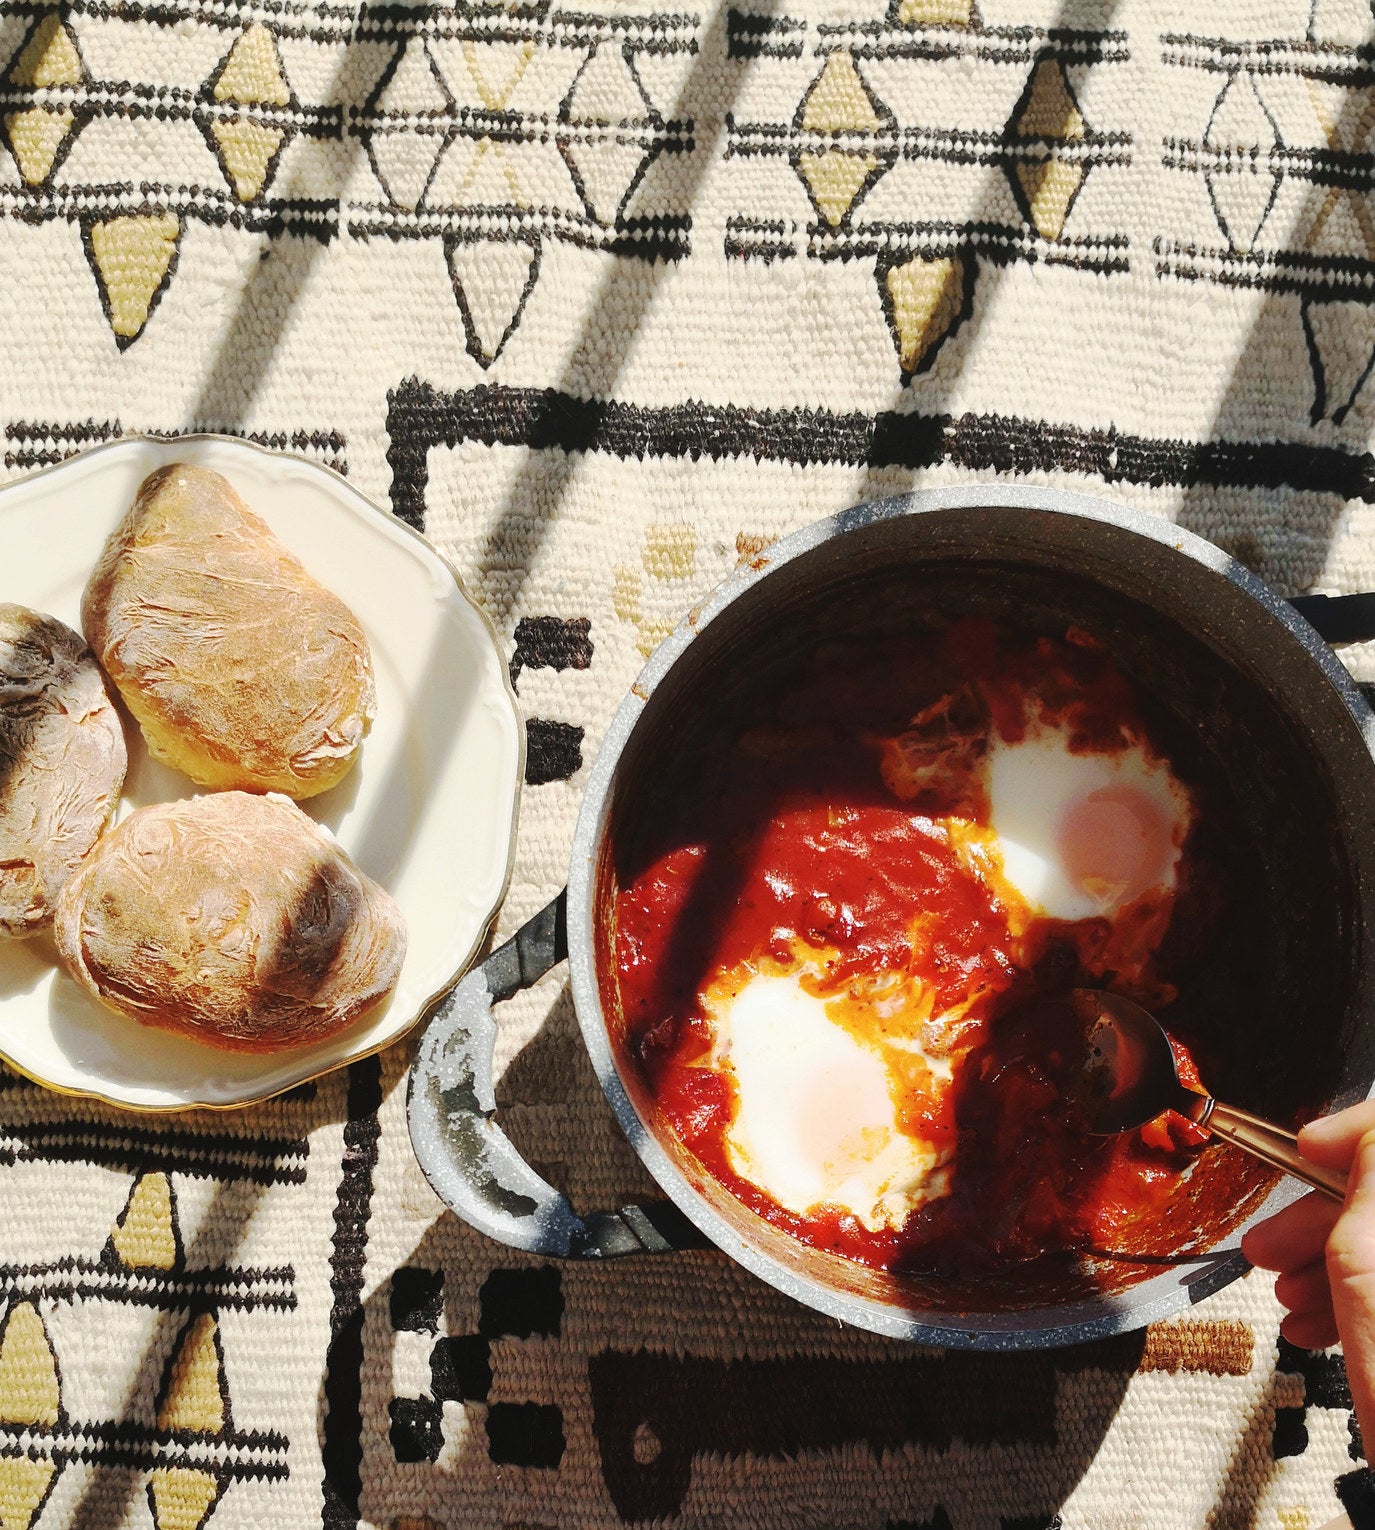 Making shakshuka in a pot with bread on the side